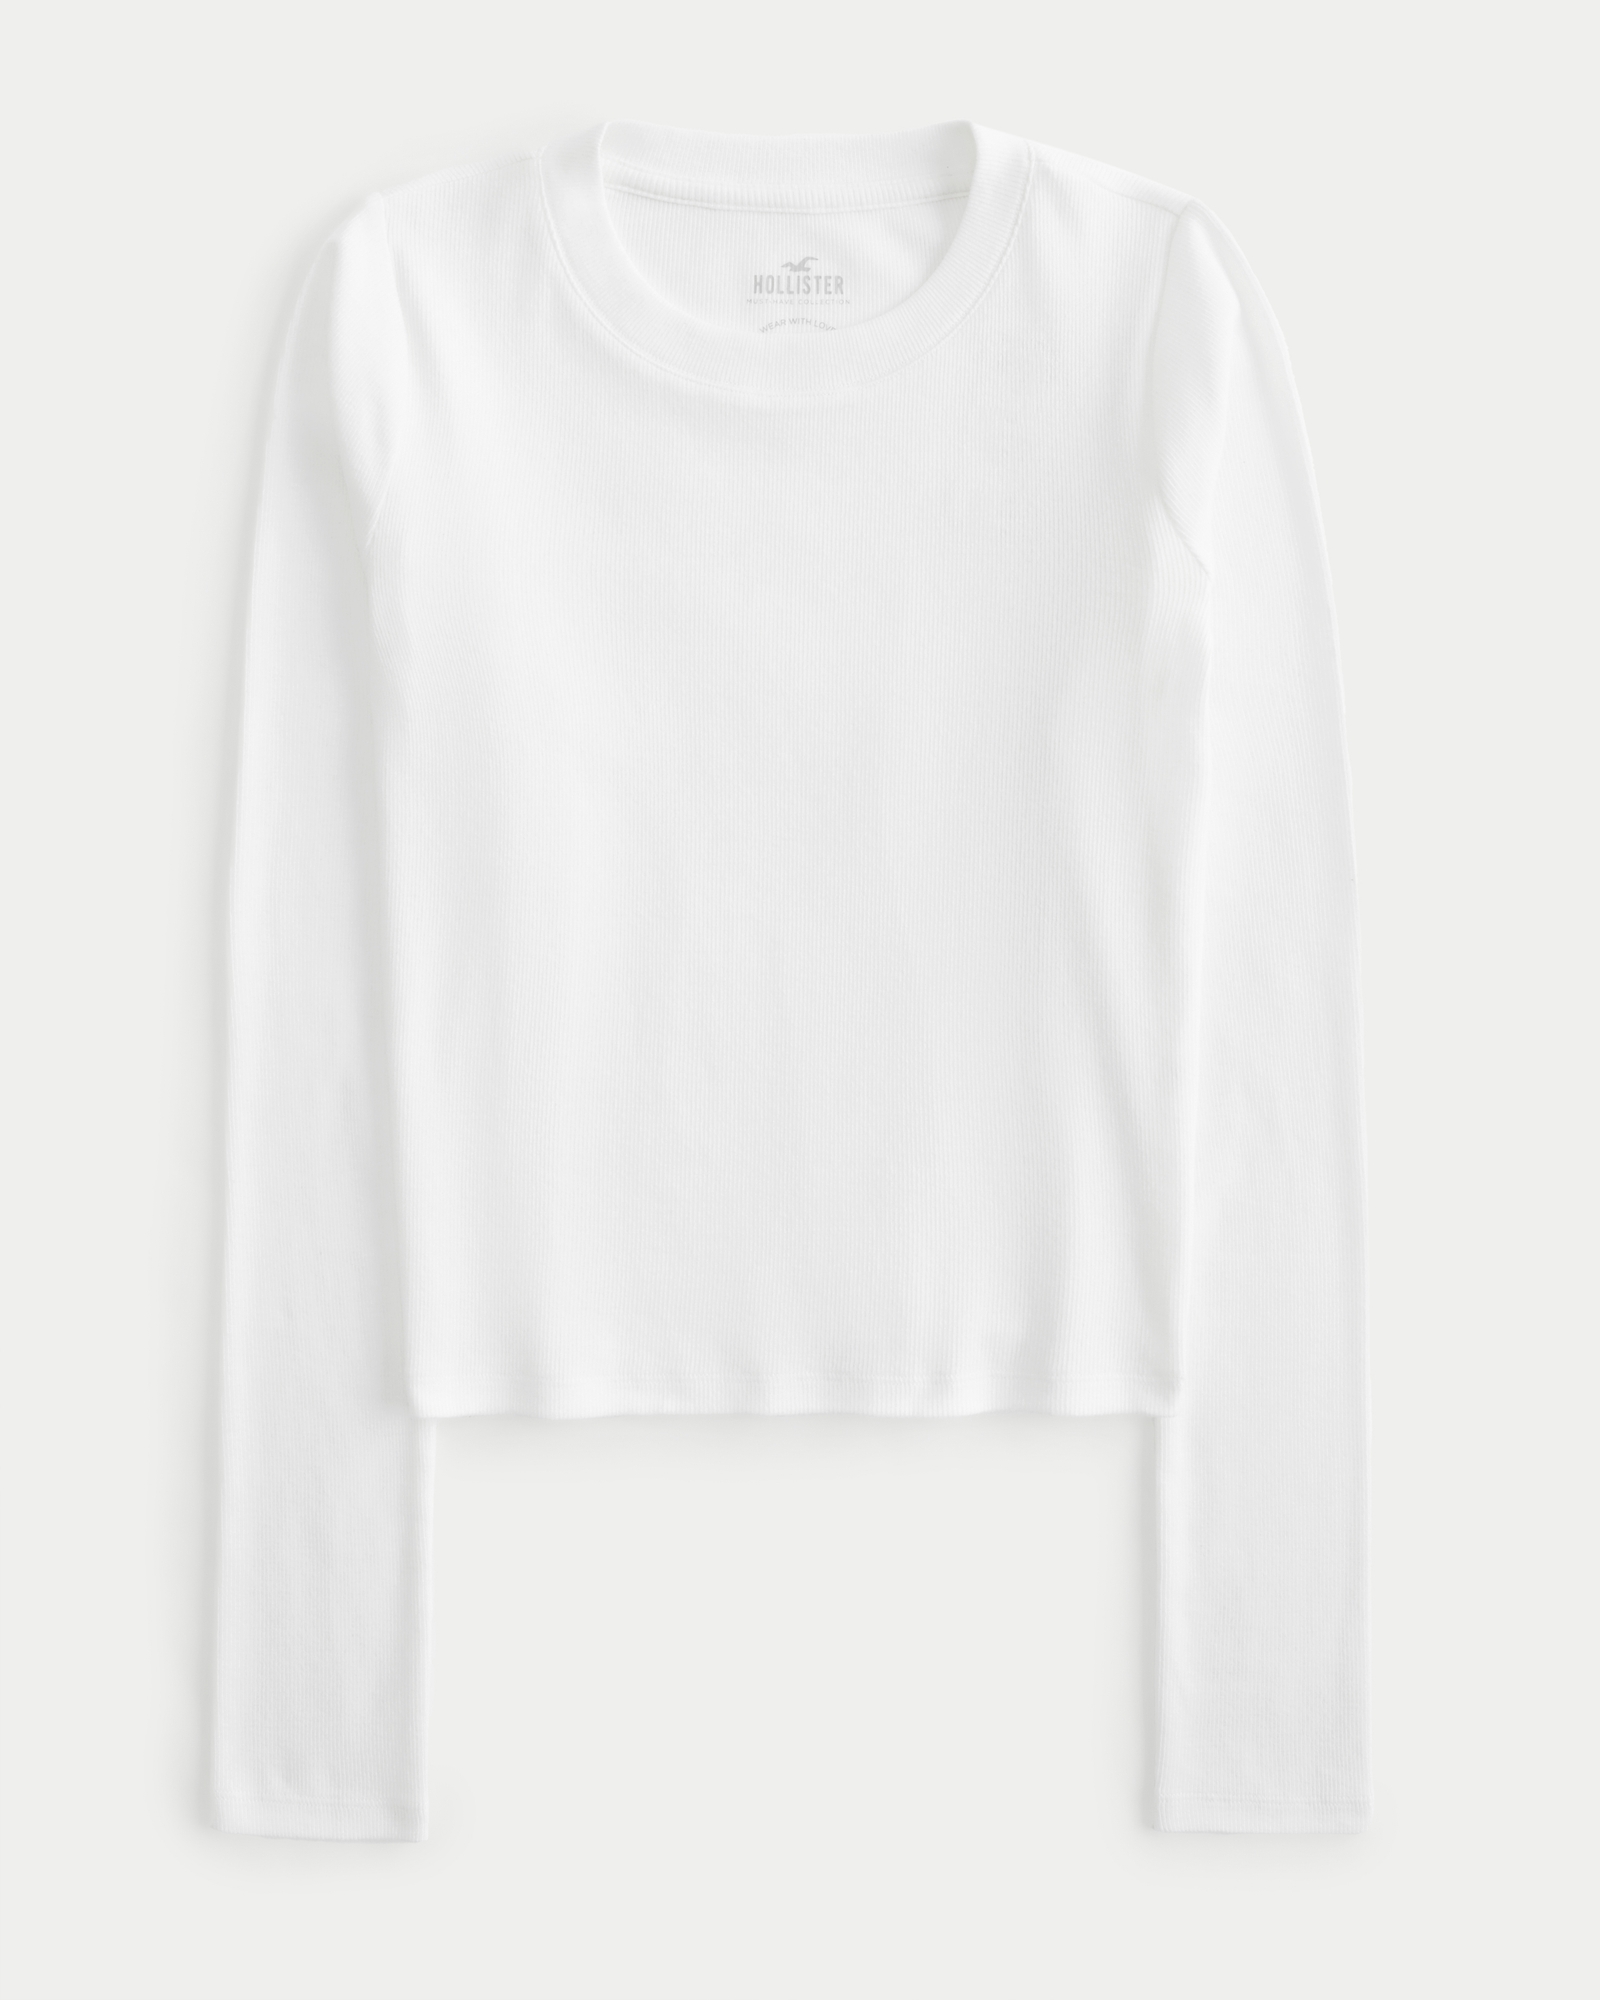 hollister long sleeve white top, Women's Fashion, Tops, Shirts on Carousell